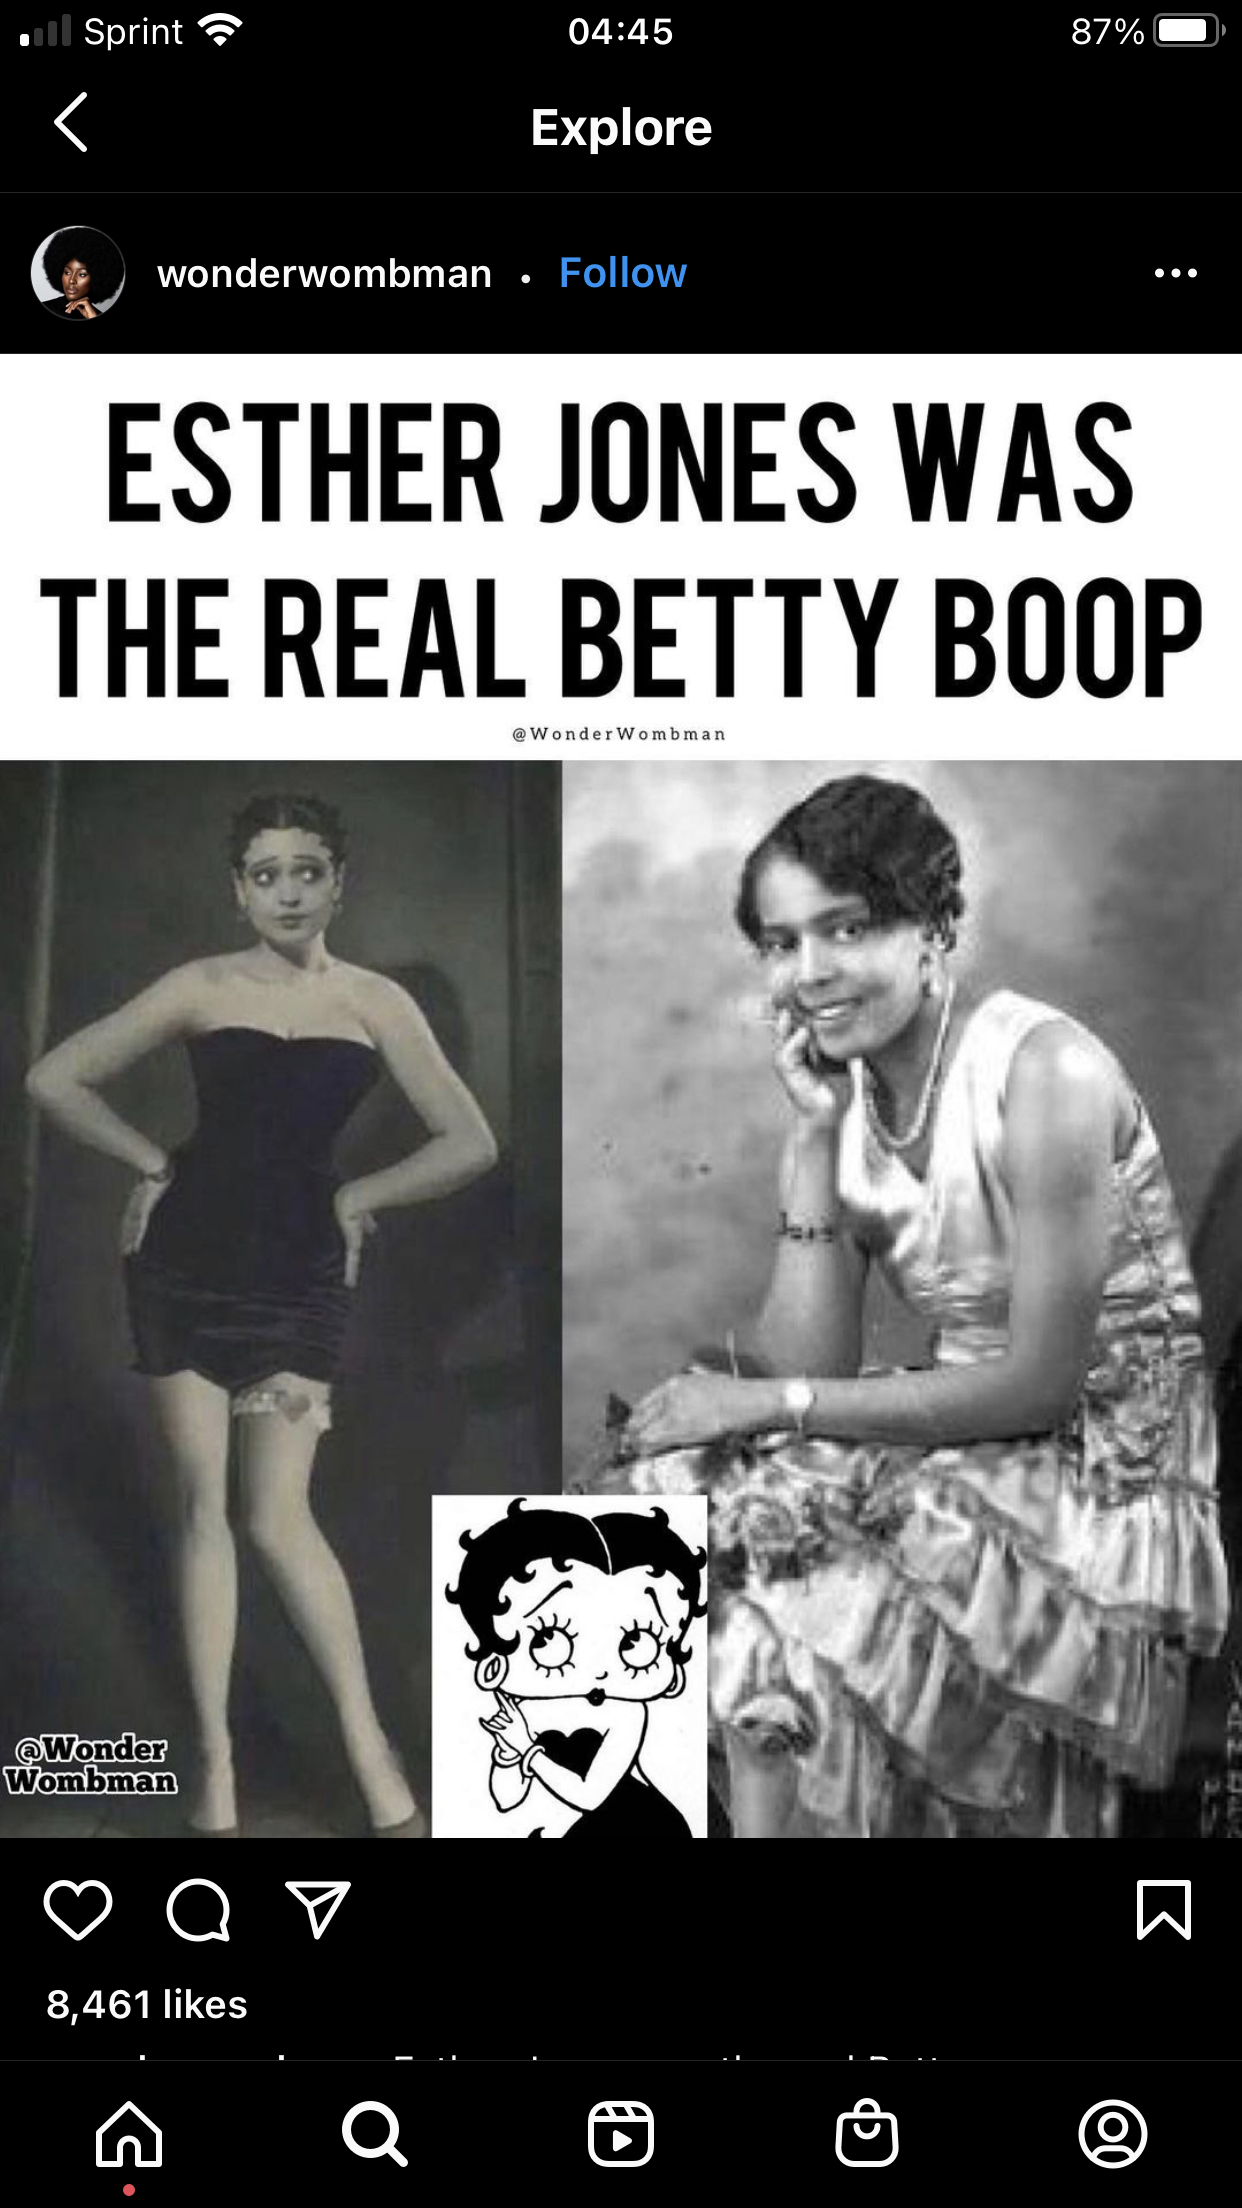 daniel takac share pictures of the real betty boop photos